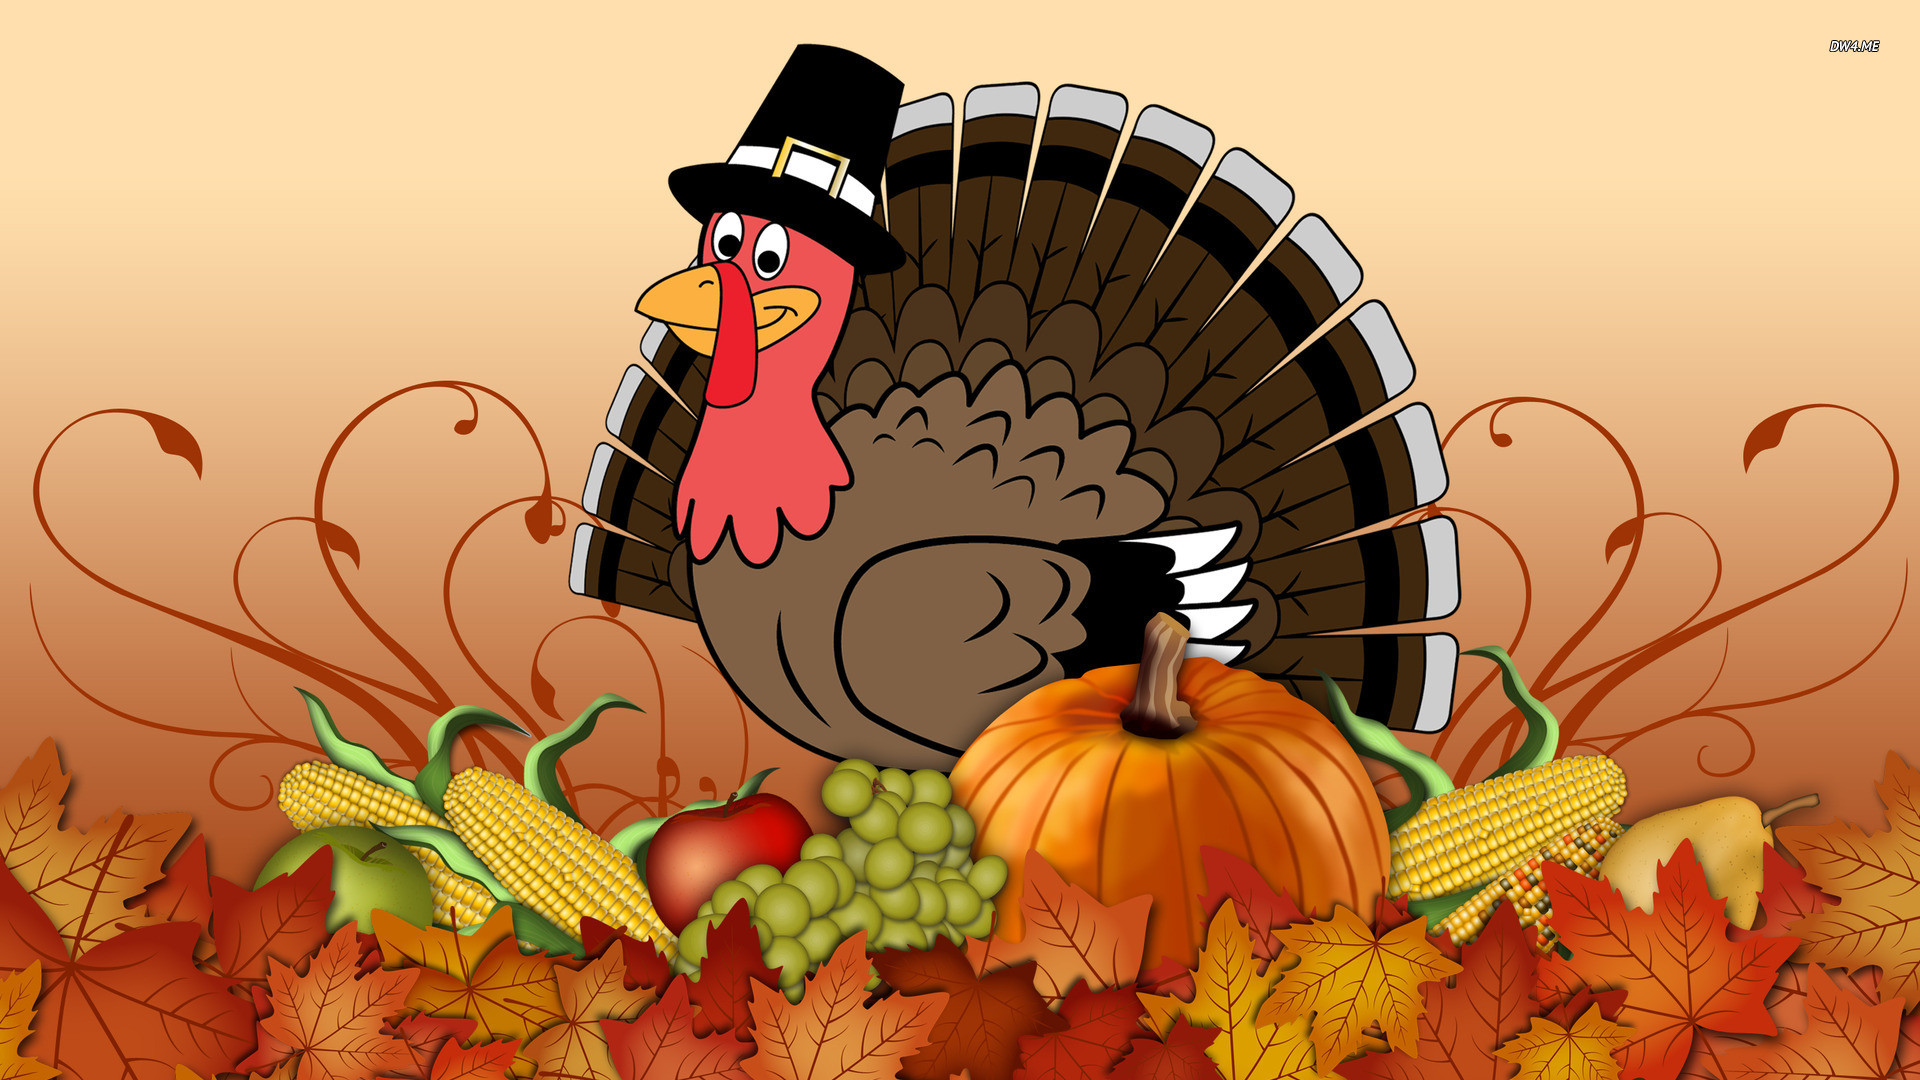 883,105 Thanksgiving Background Images, Stock Photos, 3D objects